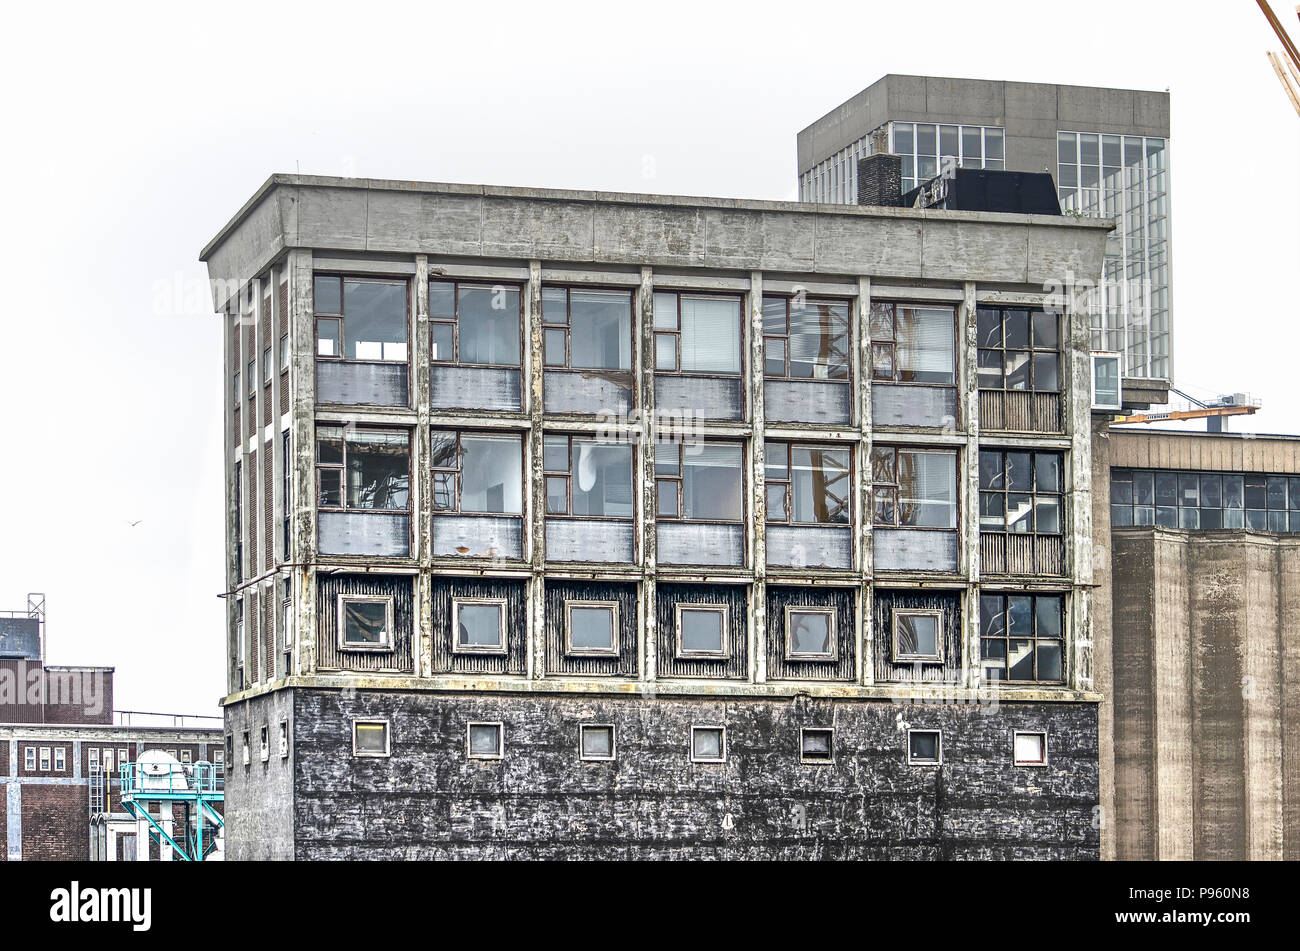 Rotterdam, The Netherlands, June 2, 2018: the upper section of the grainsilo at the neighbourhood of Katendrecht Stock Photo